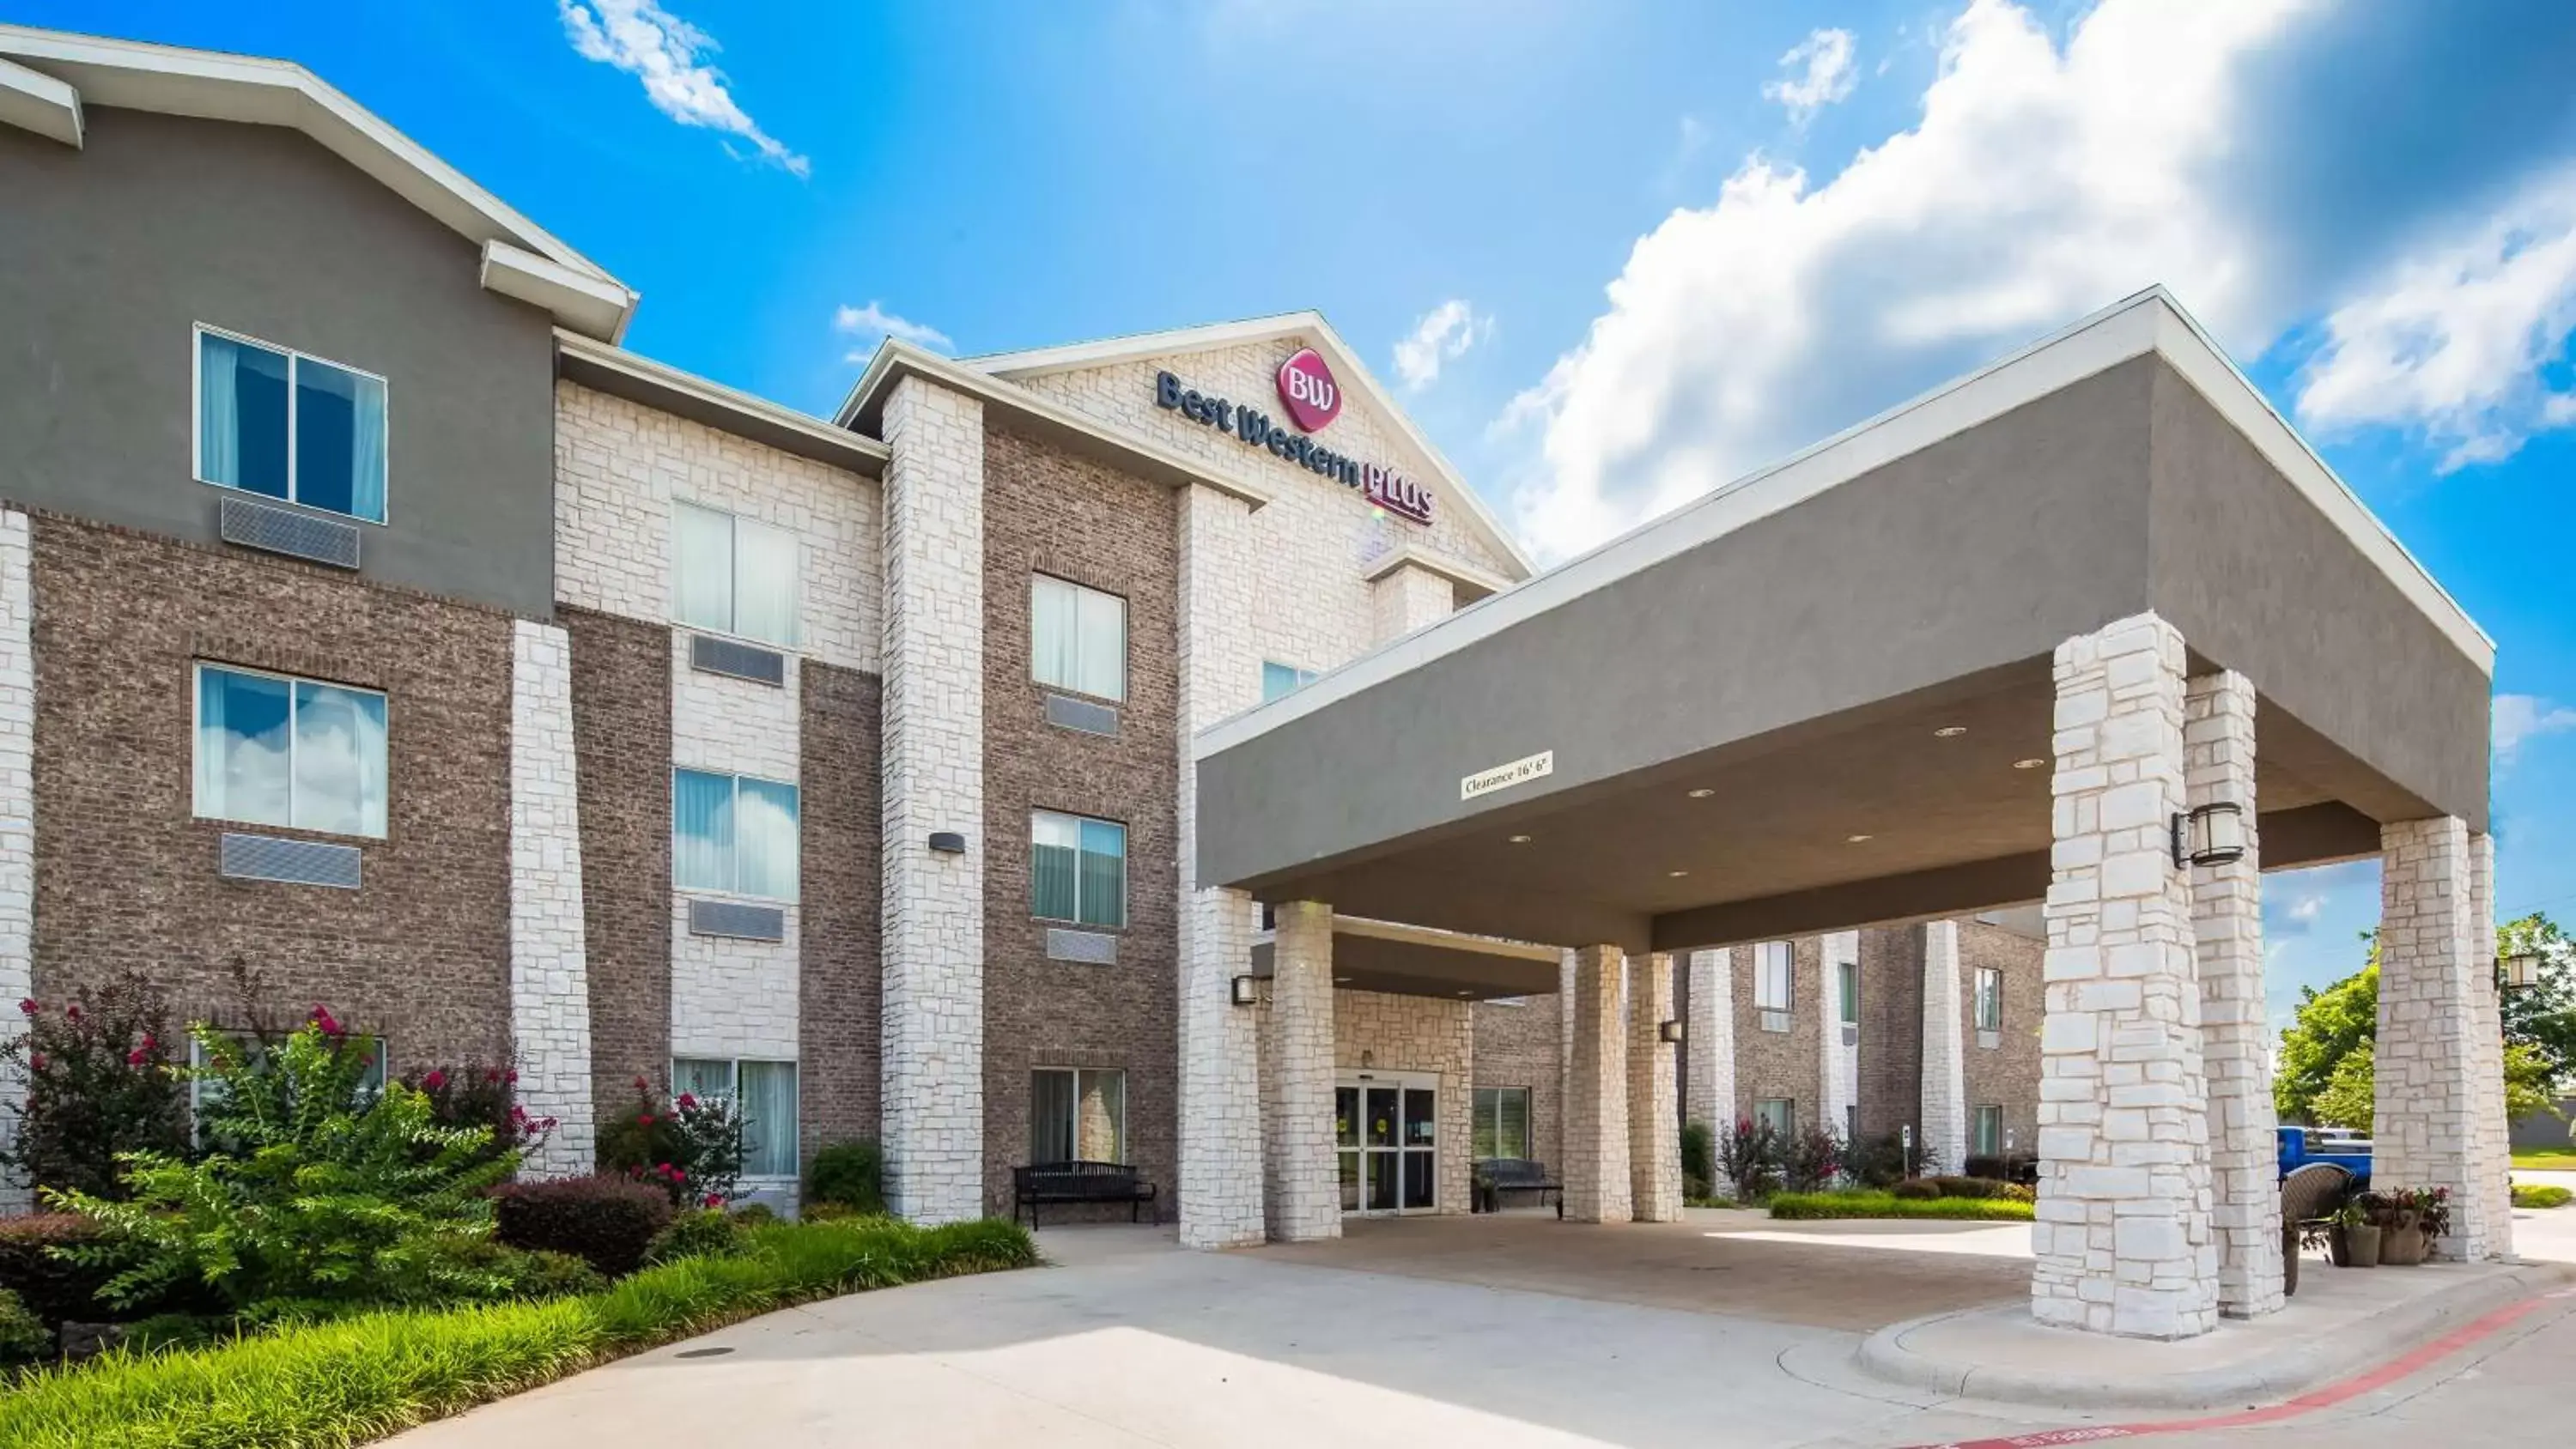 Property Building in Best Western Plus Sand Bass Inn and Suites